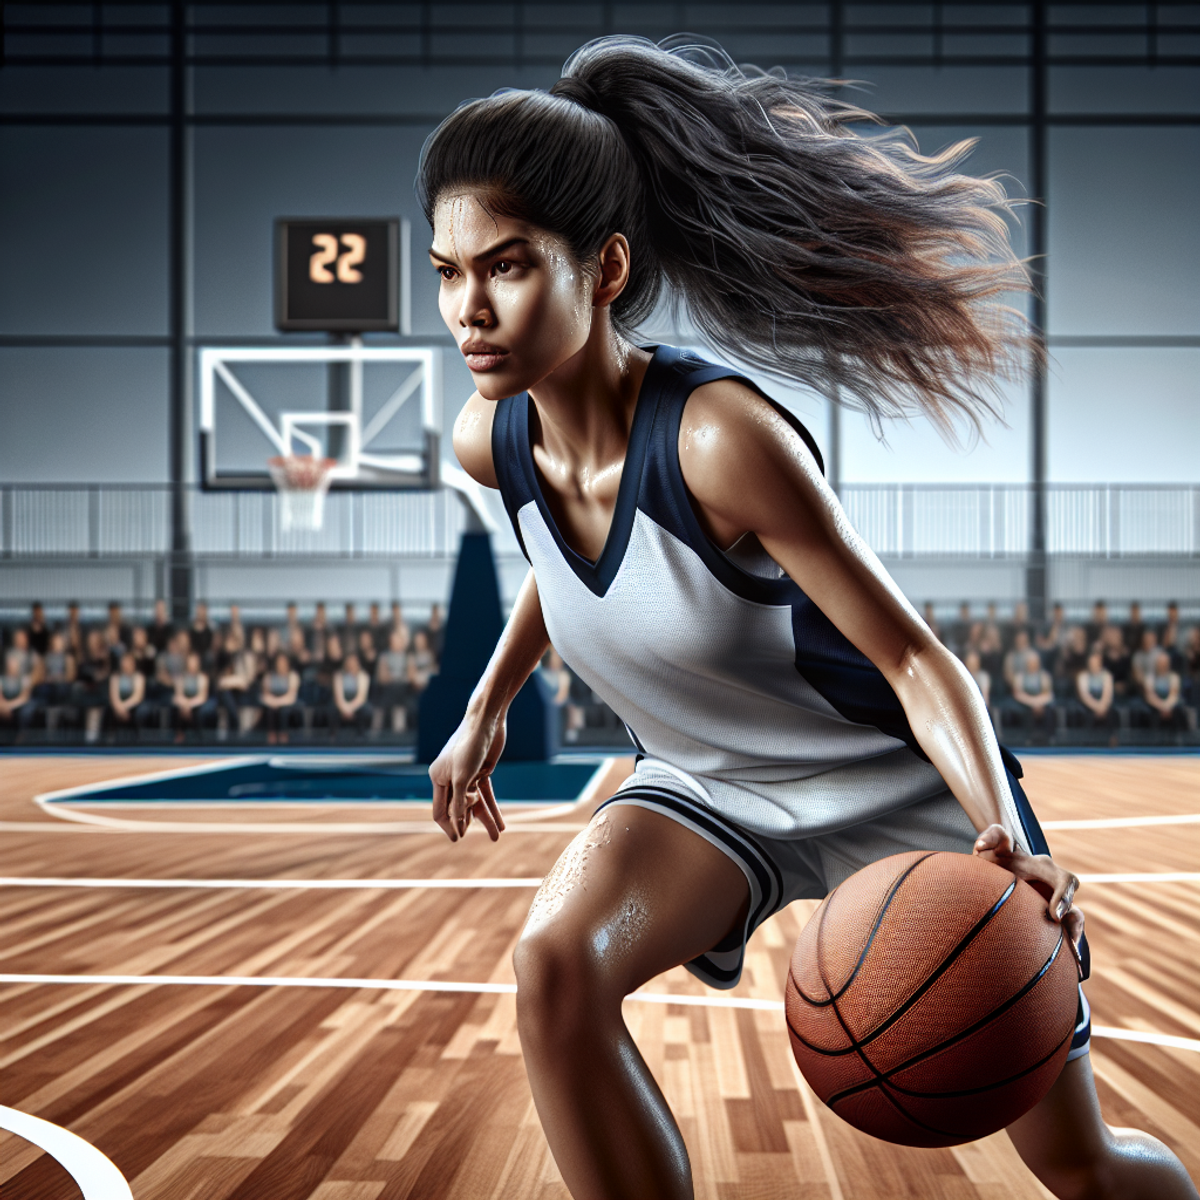 A determined South Asian female basketball player dribbling the ball with intense focus on a basketball court.